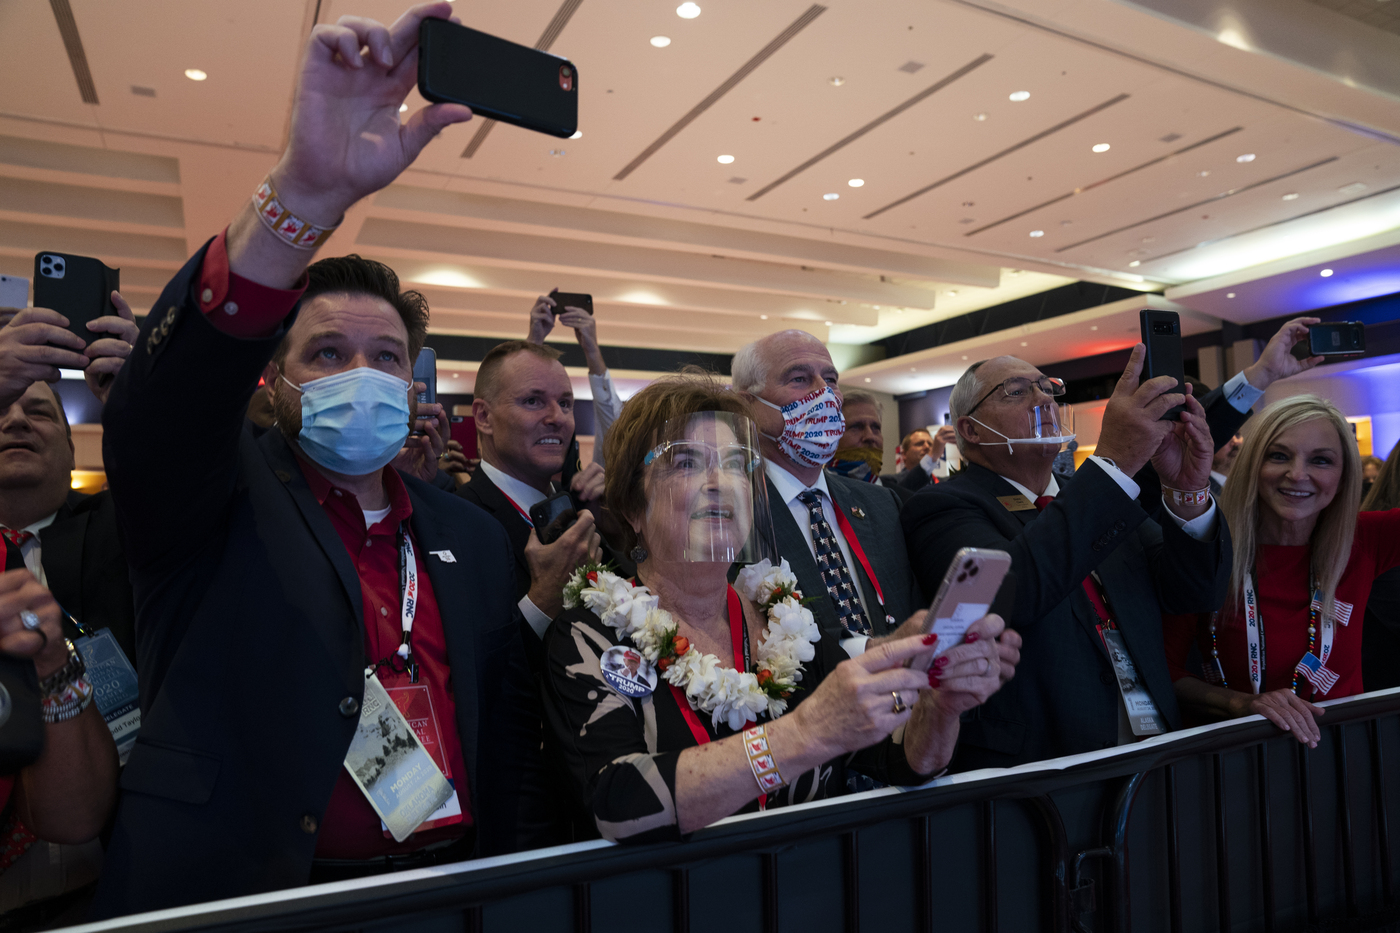 Delegates cheer as President Donald Trump arrives to speak at Republican National Committee convention, Monday, Aug. 24, 2020, in Charlotte. (AP Photo/Evan Vucci)